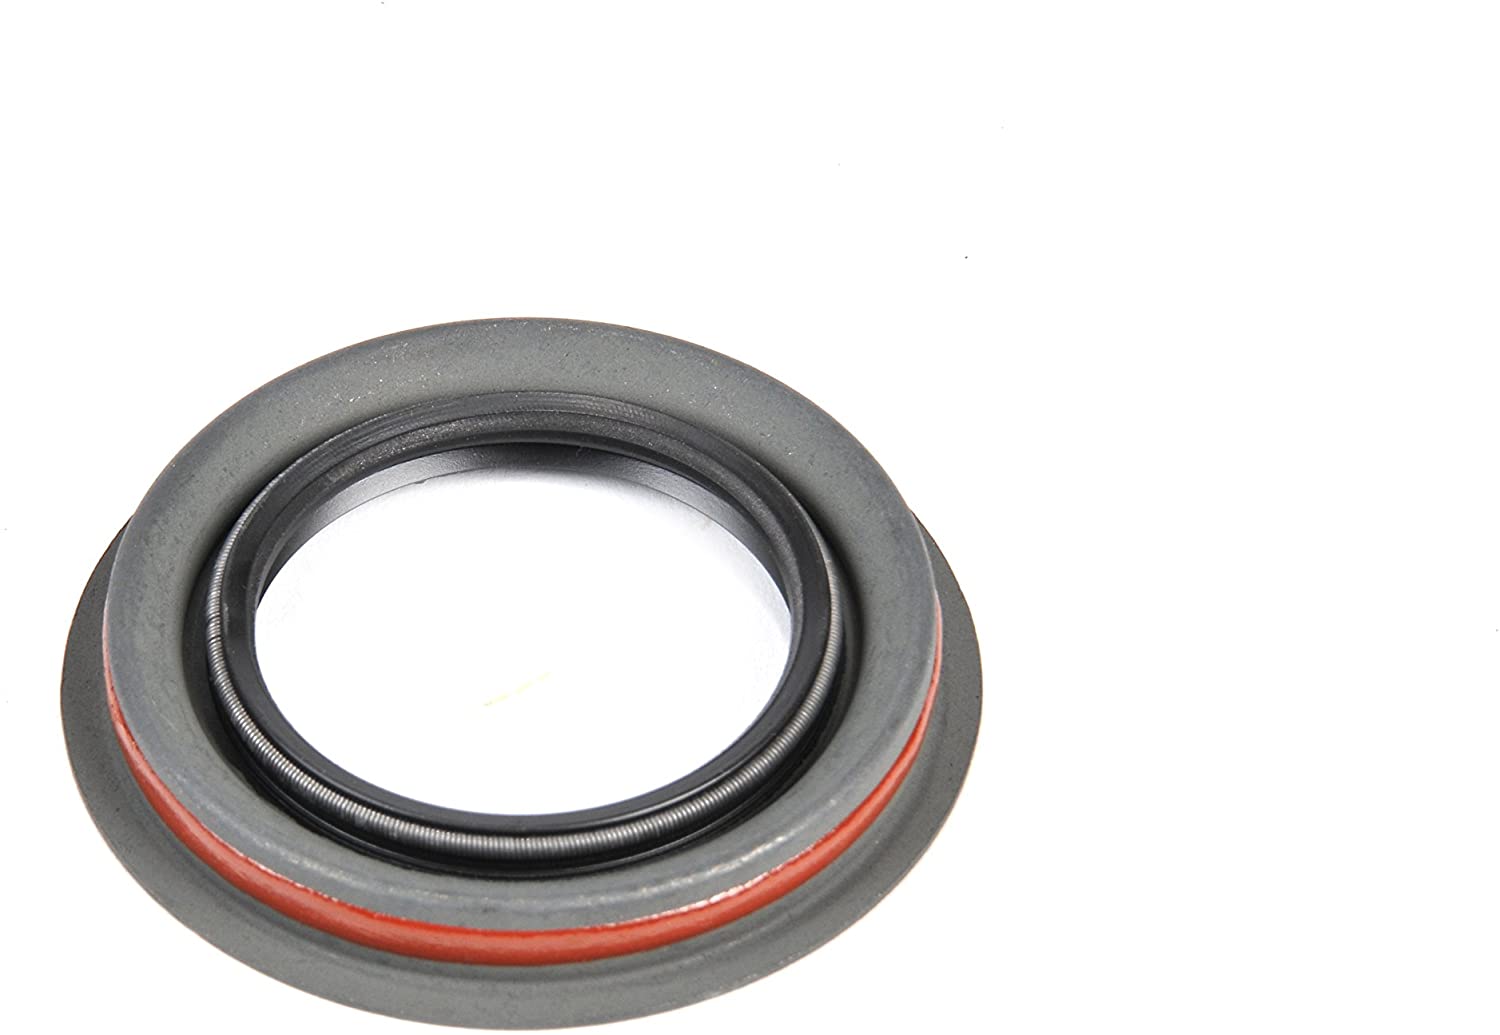 GM Genuine Parts 15521874 Front Axle Shaft Seal